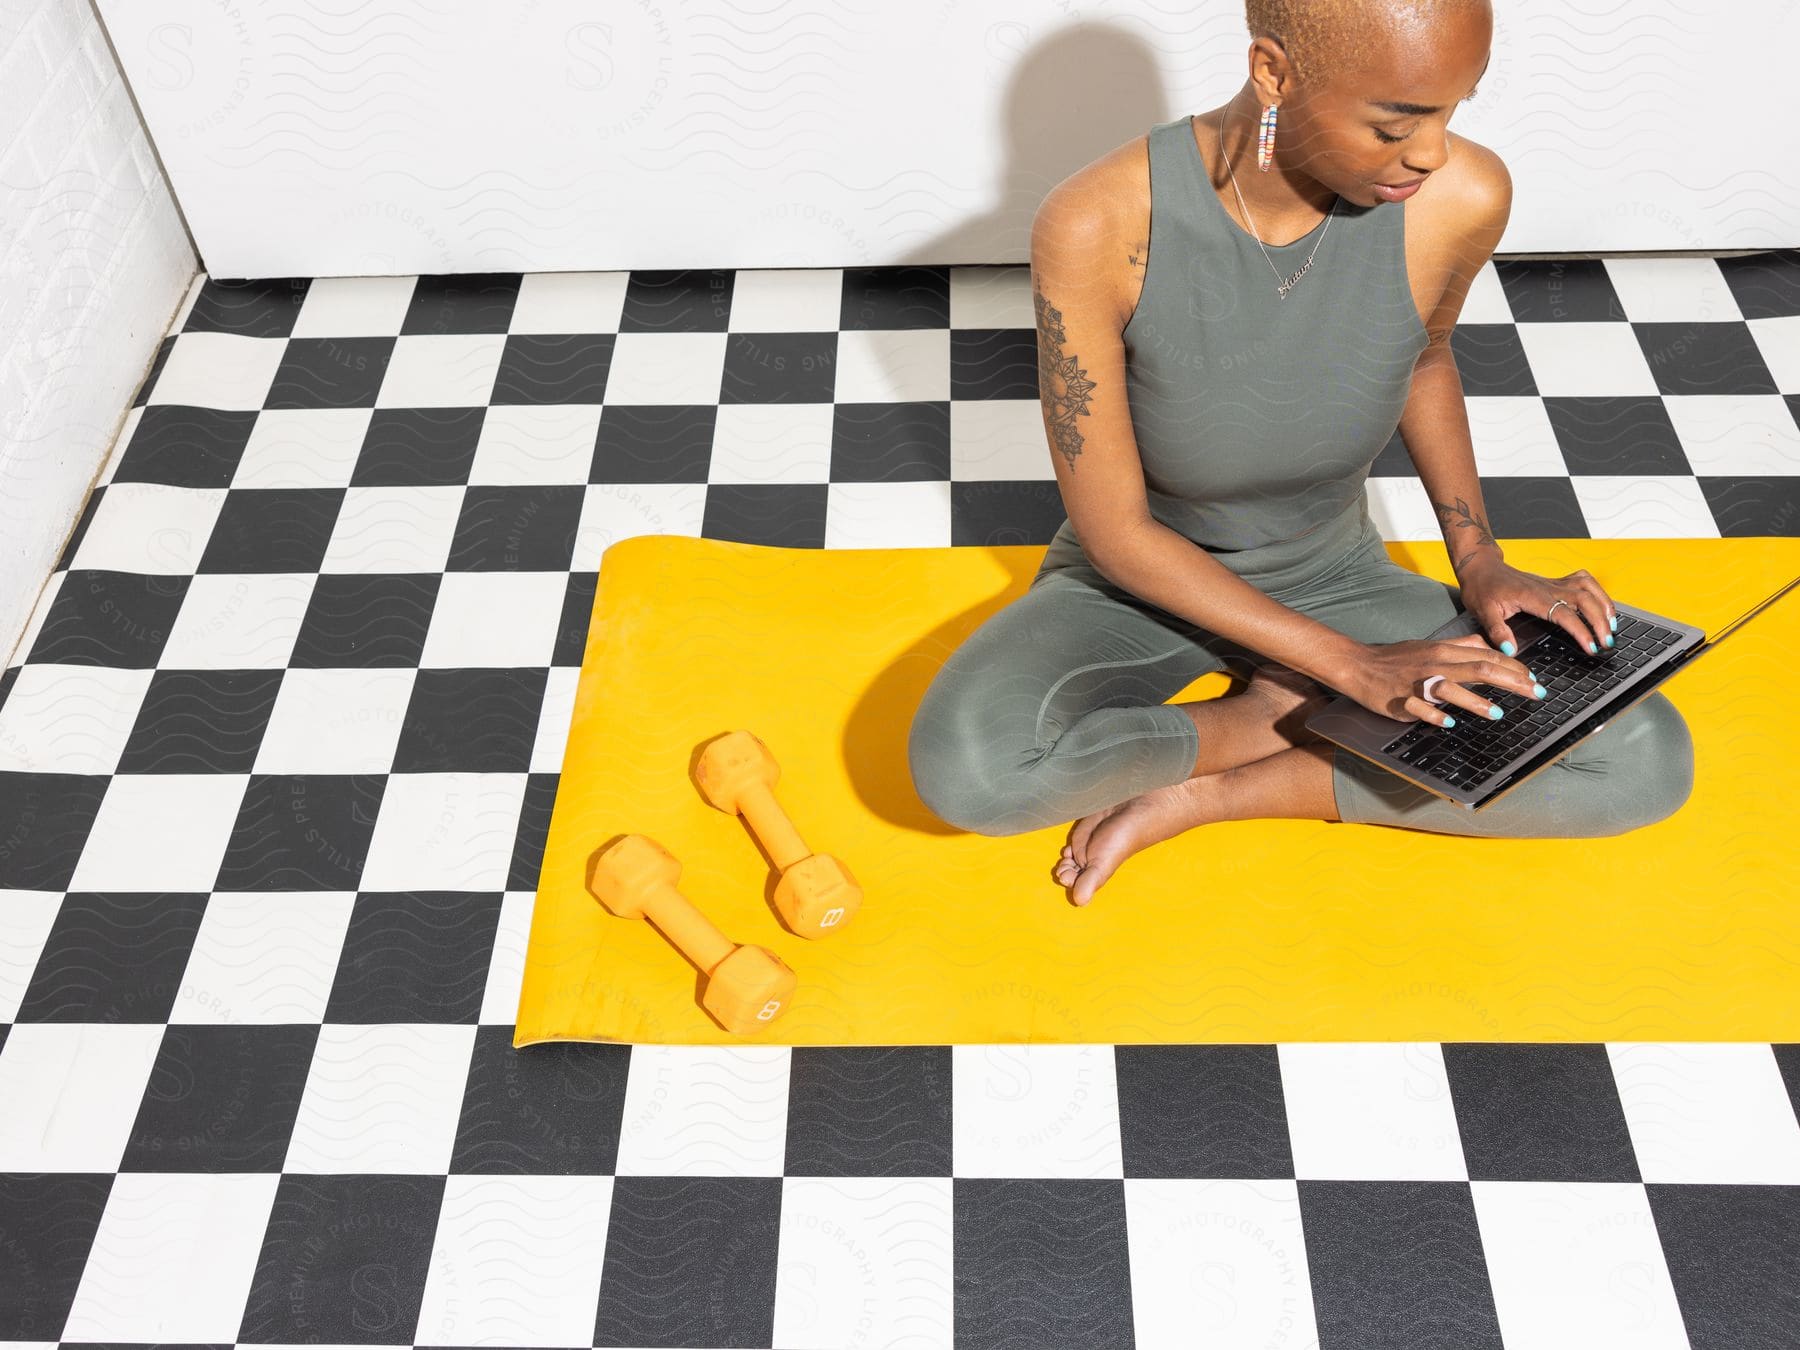 Stock photo of a women is sitting on her exercising mat as she types on her lap top.